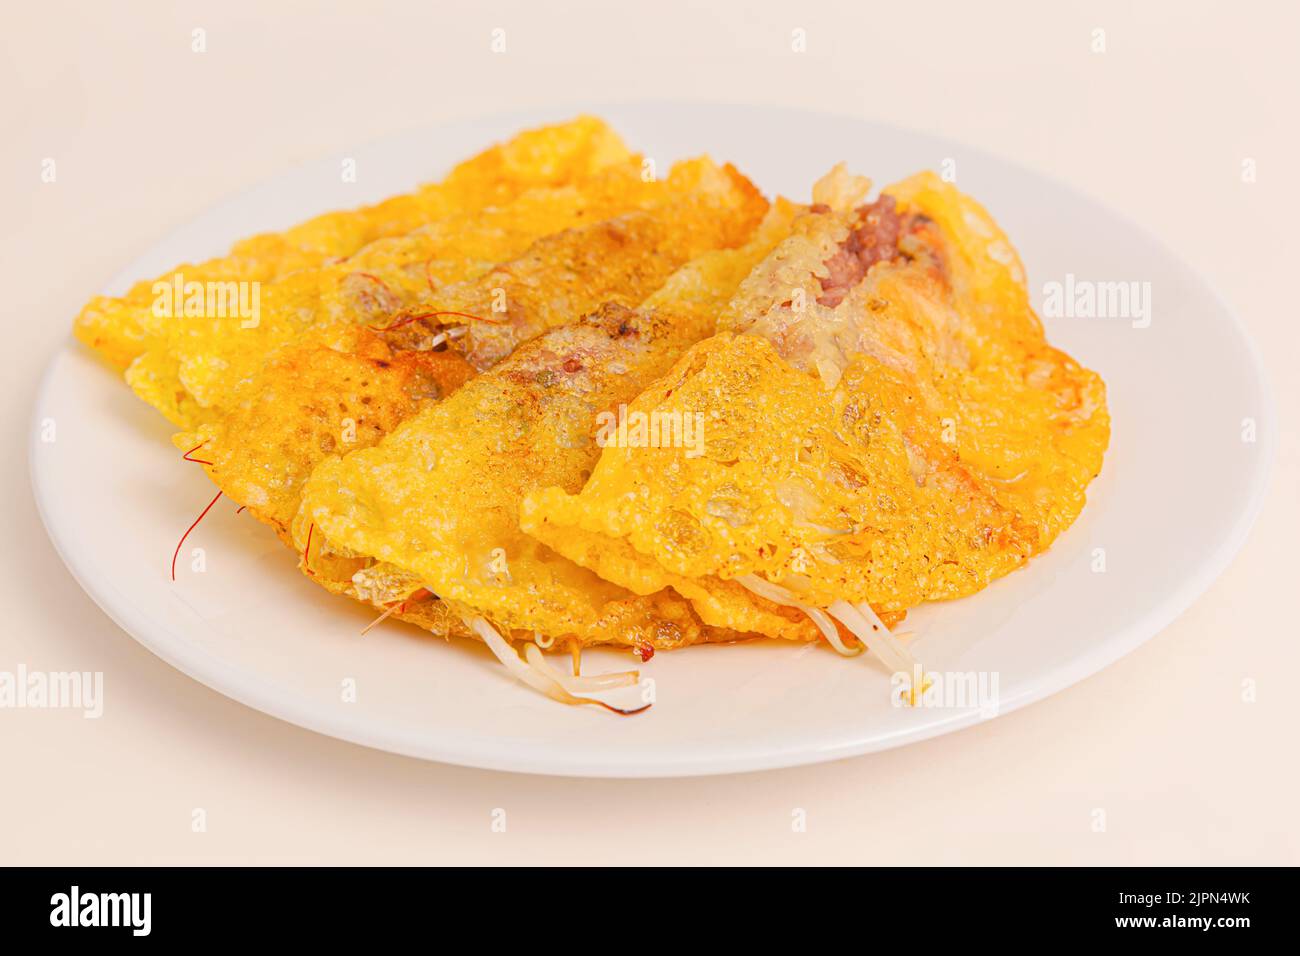 Banh xeo, Vietnamese Crêpes or Pancakes with pork, shrimp, onions, beasn sprouts inside, Vietnamese food isolated on white background. close-up Stock Photo